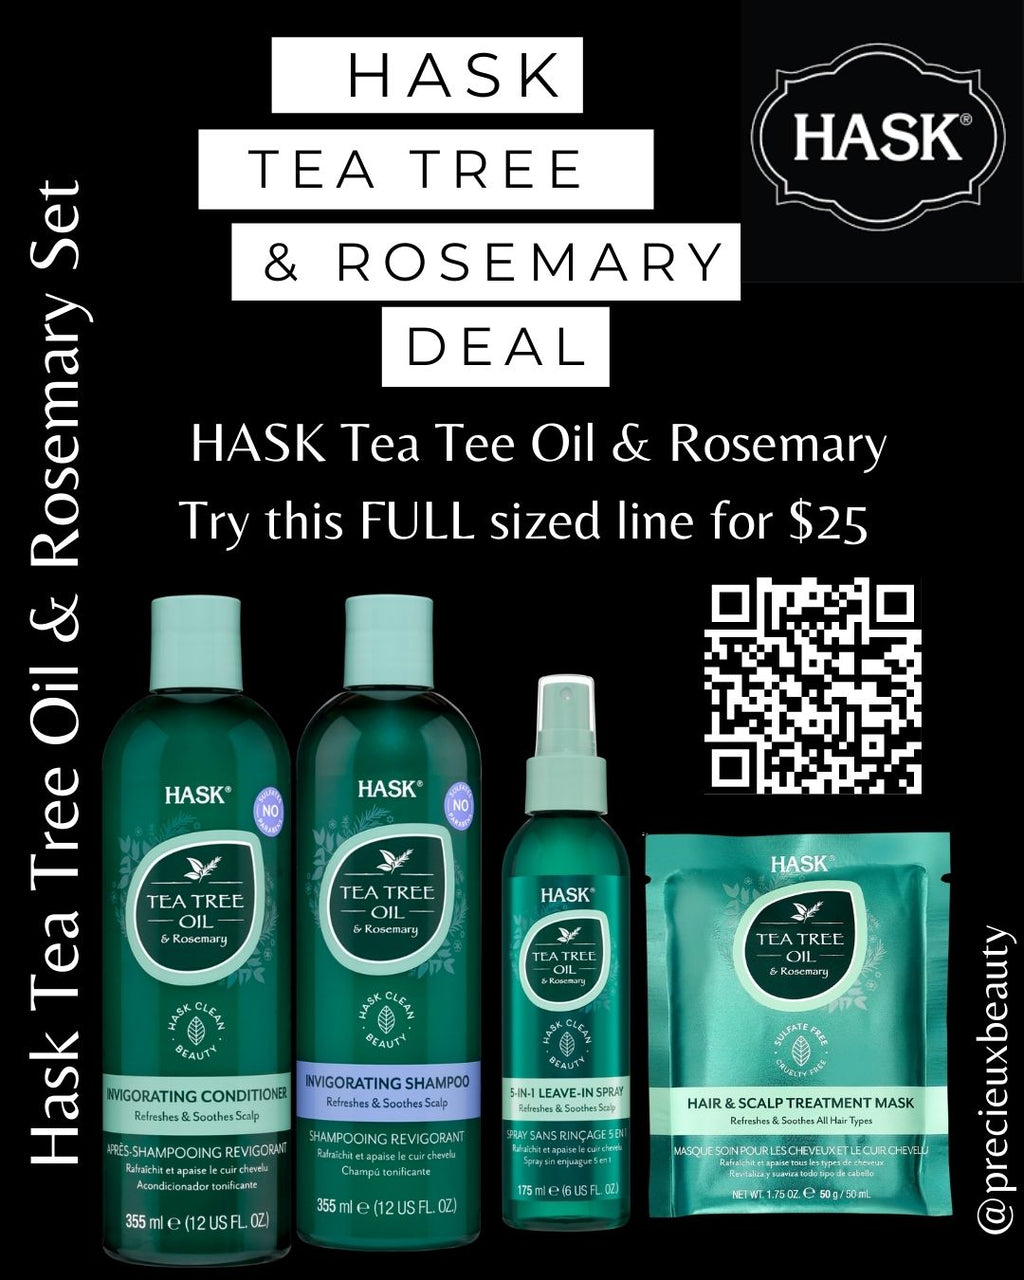 Hask Tea Tree Oil & Rosemary Collection Deal